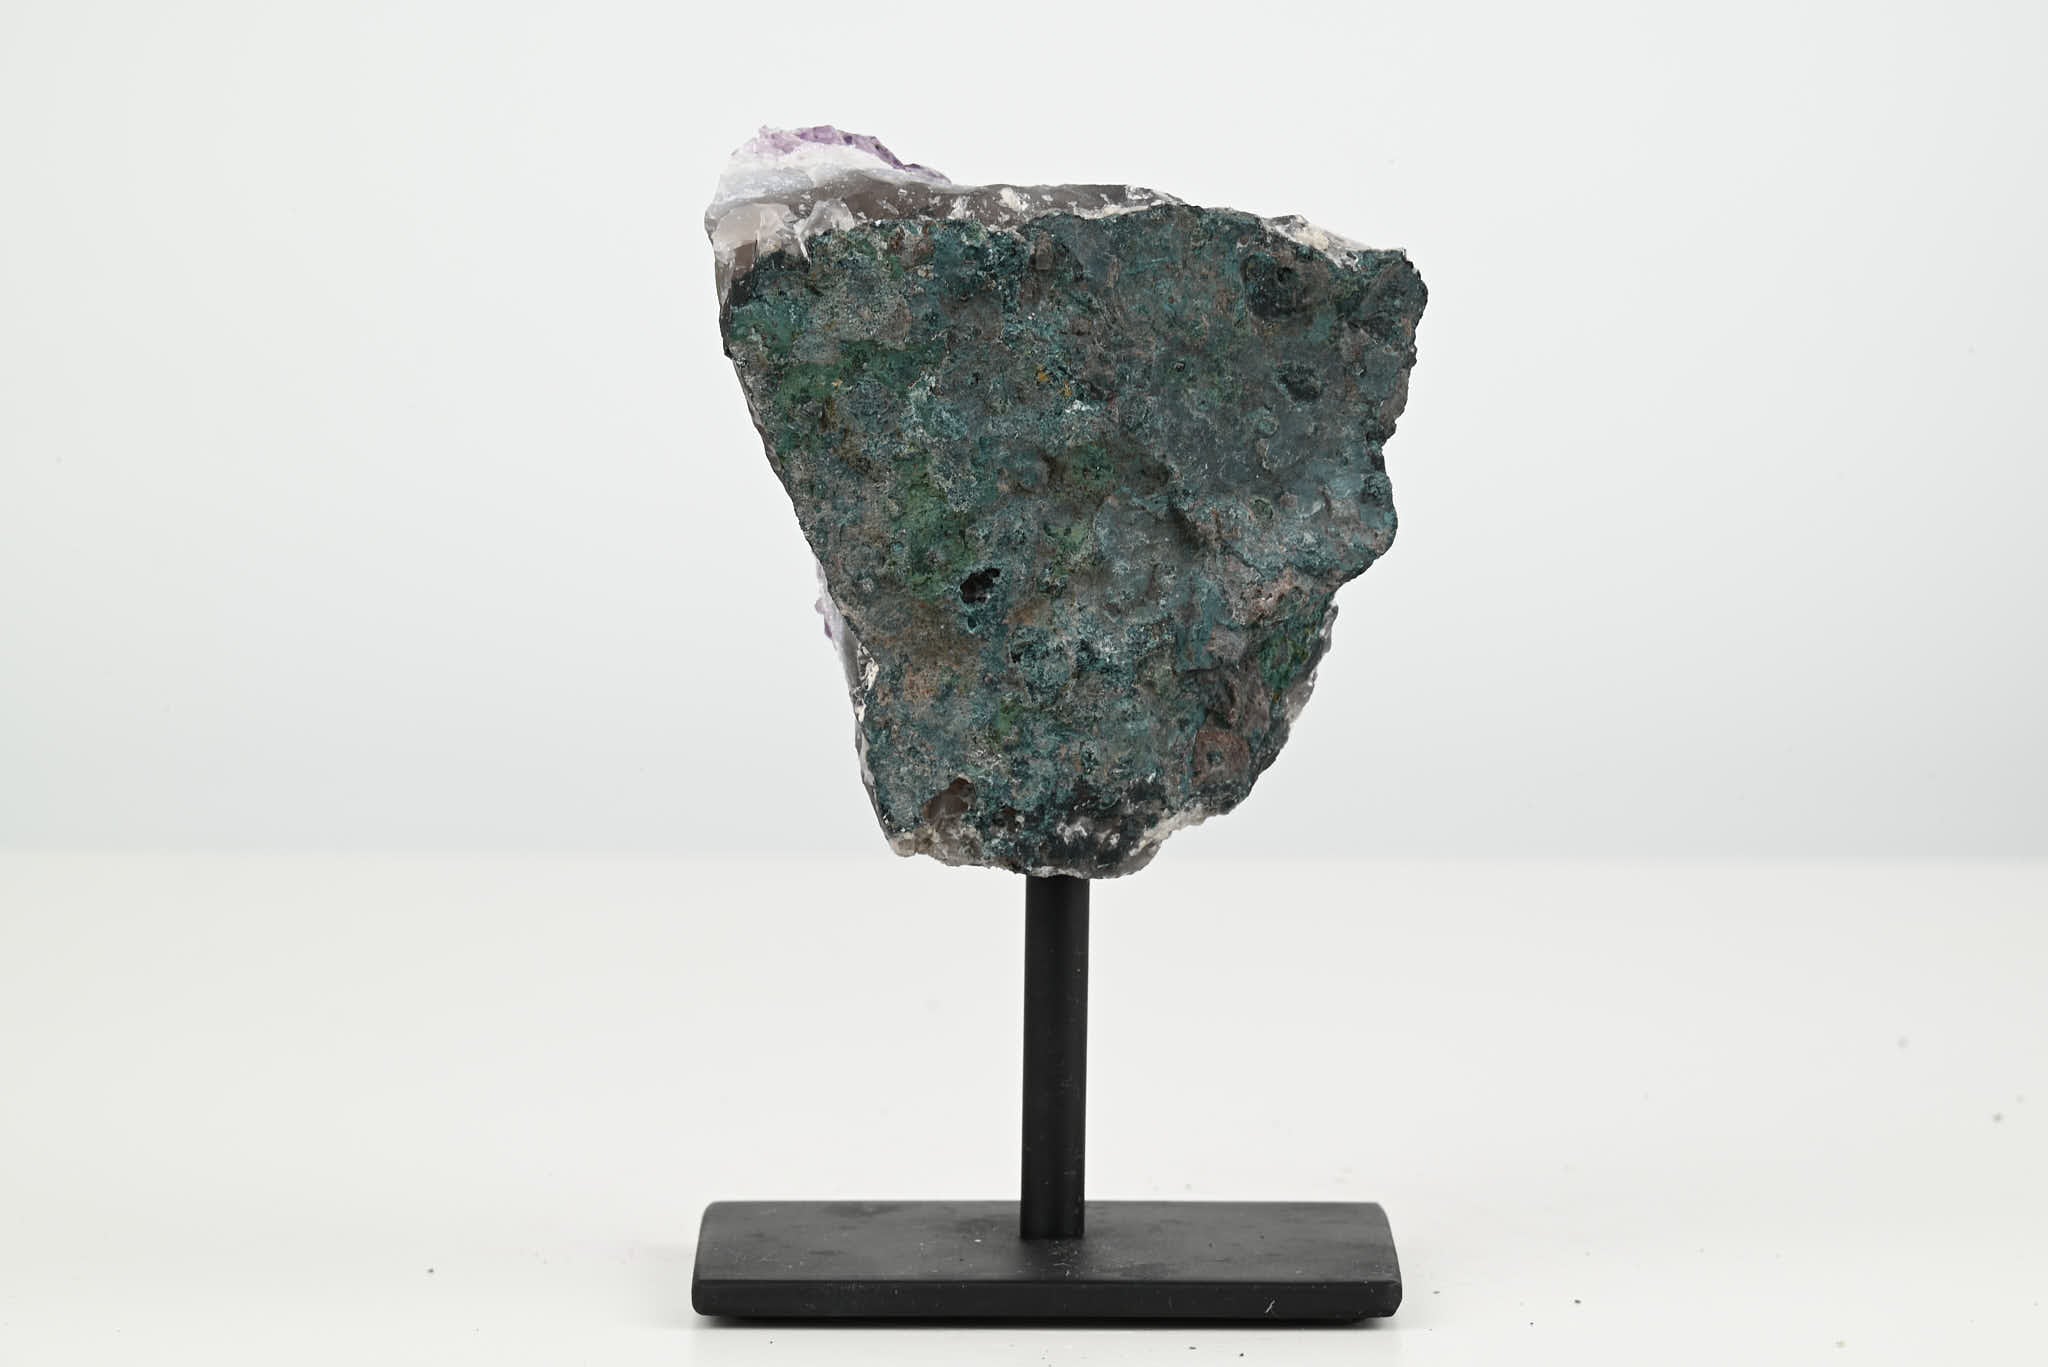 Amethyst Cluster on Stand - Small 11cm Tall - #CLUSAM-63024